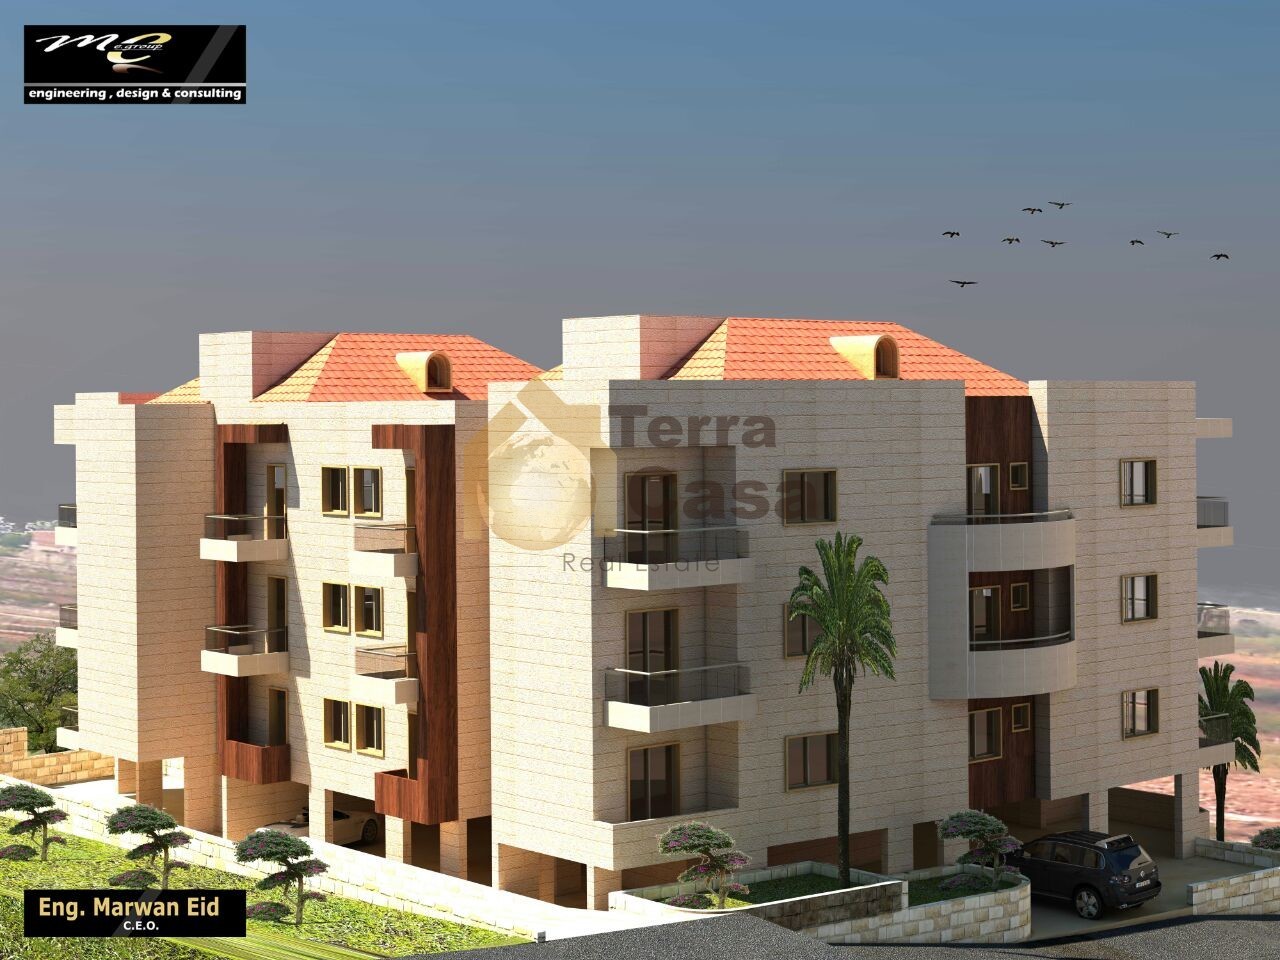 Zahle brand new apartment in a nice neighborhood cash payment. Ref# 323